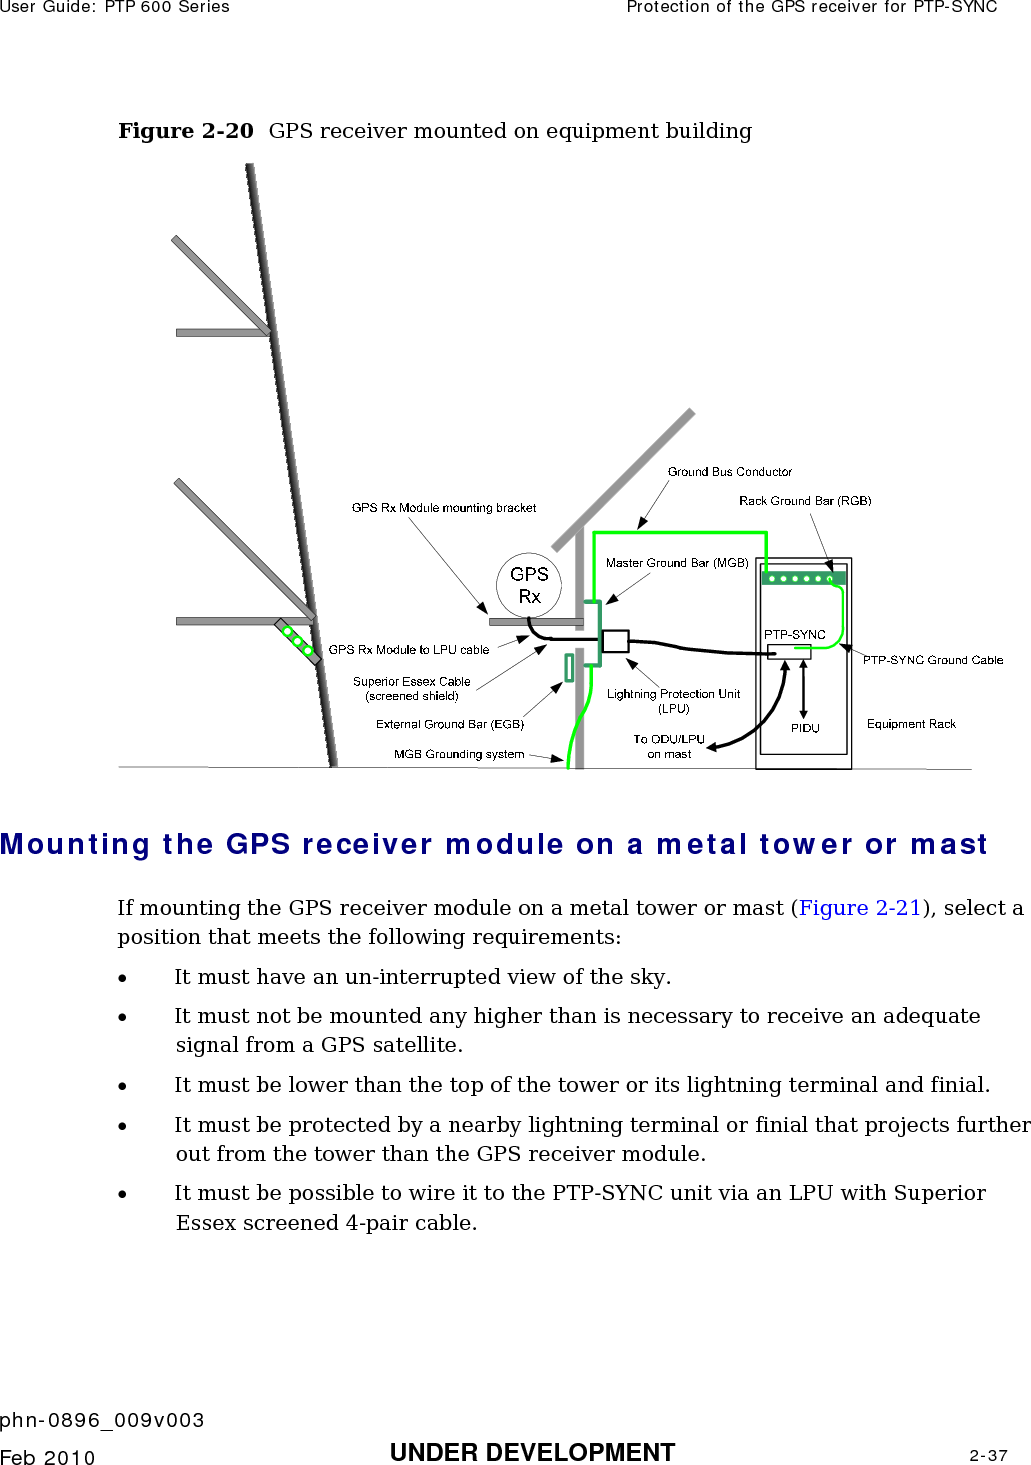 User Guide: PTP 600 Series  Protection of the GPS receiver for PTP-SYNC    phn-0896_009v003   Feb 2010  UNDER DEVELOPMENT  2-37  Figure 2-20  GPS receiver mounted on equipment building  Mounting the GPS receiver module on a metal tower or mast If mounting the GPS receiver module on a metal tower or mast (Figure 2-21), select a position that meets the following requirements: • It must have an un-interrupted view of the sky. • It must not be mounted any higher than is necessary to receive an adequate signal from a GPS satellite. • It must be lower than the top of the tower or its lightning terminal and finial. • It must be protected by a nearby lightning terminal or finial that projects further out from the tower than the GPS receiver module.  • It must be possible to wire it to the PTP-SYNC unit via an LPU with Superior Essex screened 4-pair cable. 